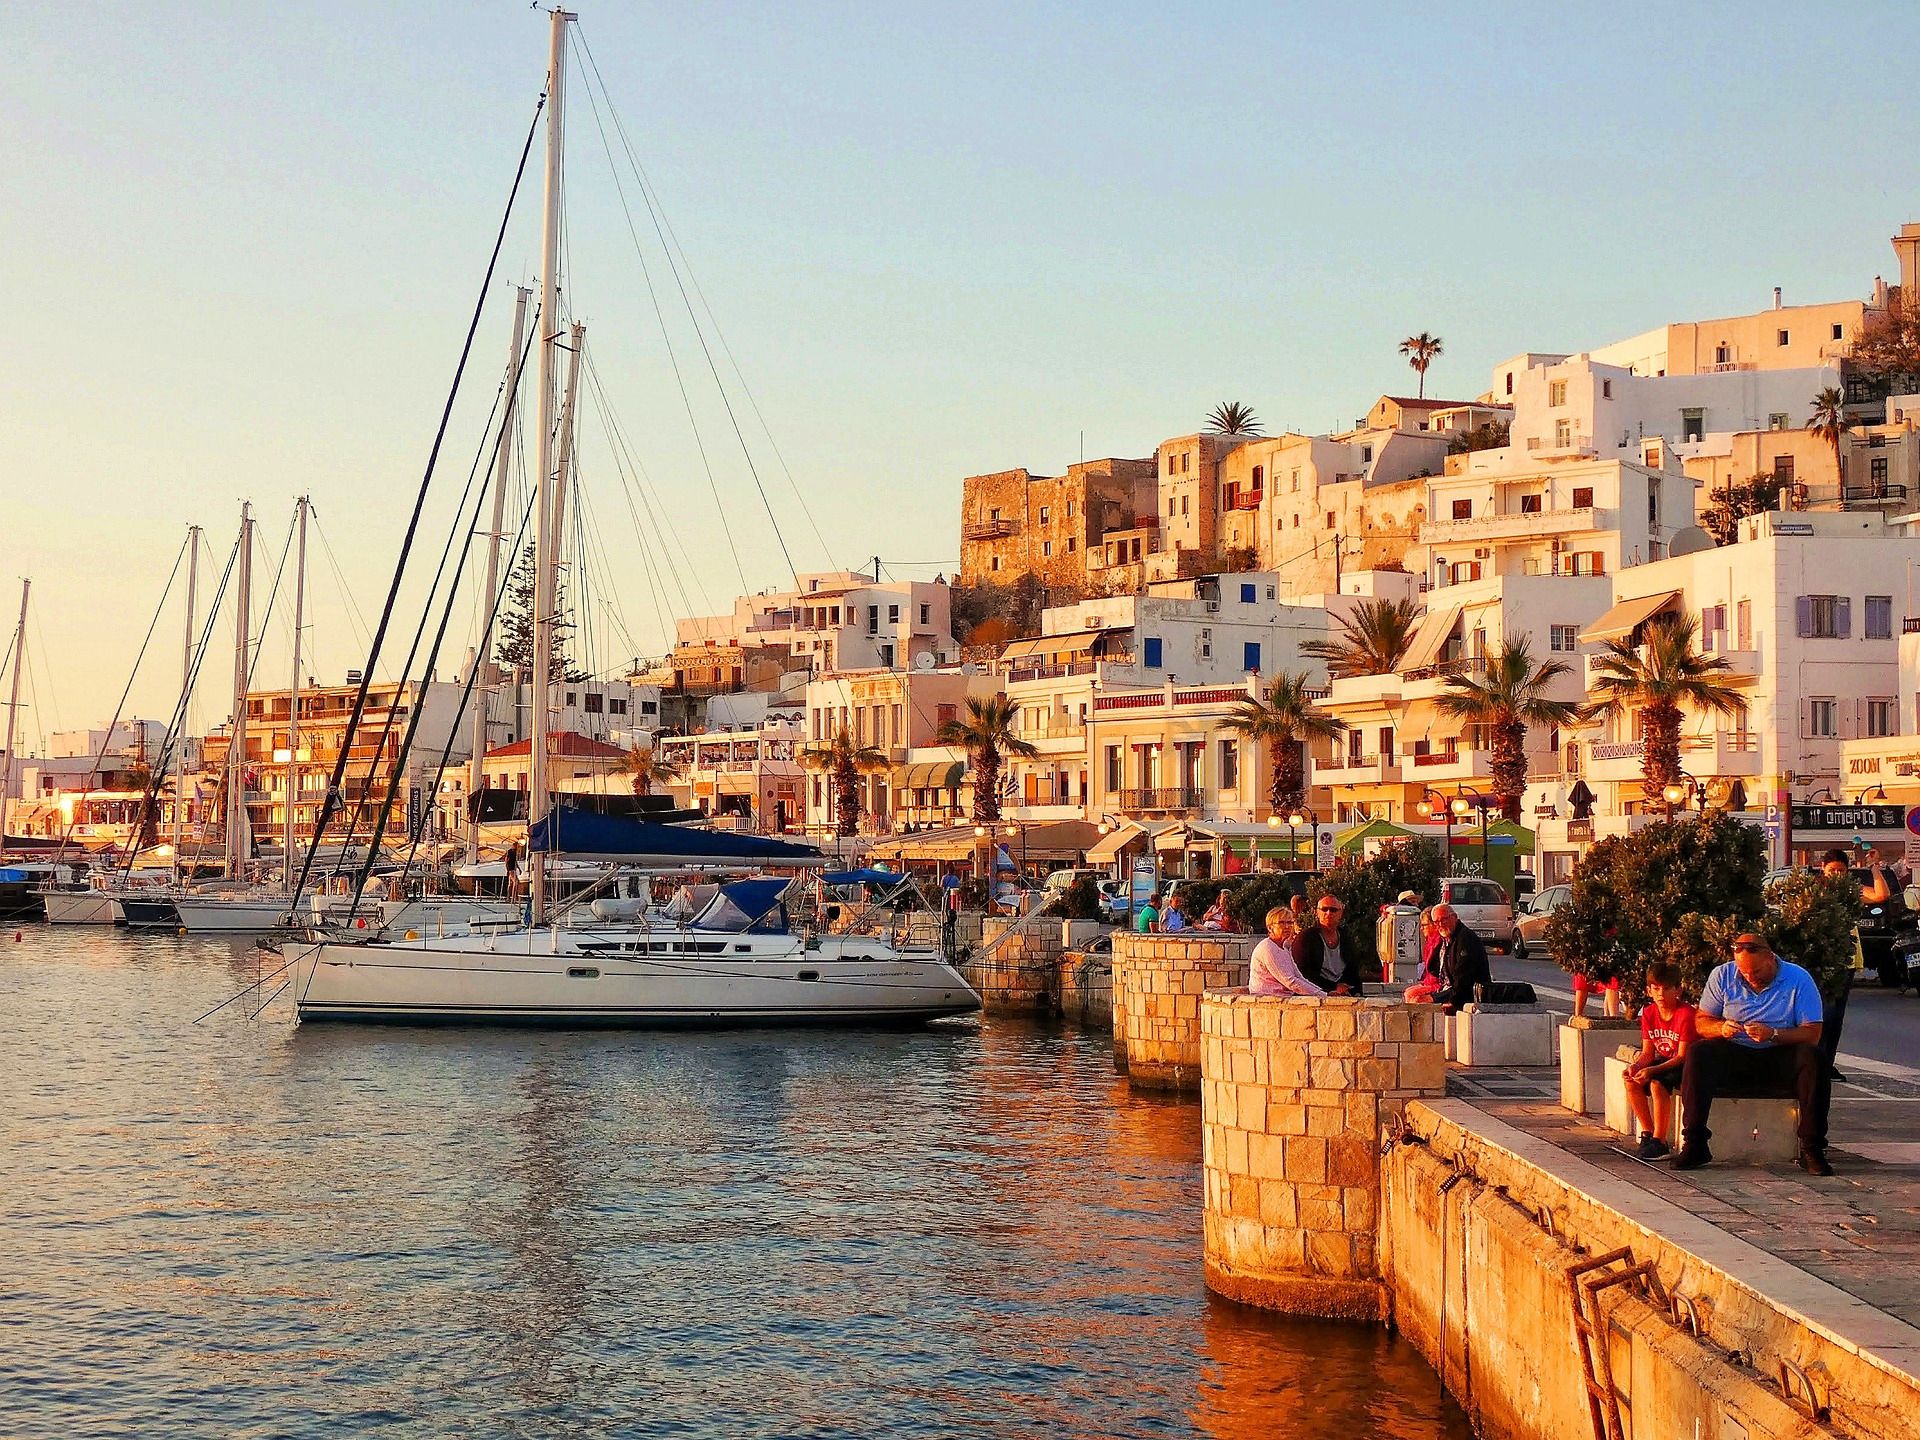 Conde Nast recommends visiting the Cyclades in Greece during May